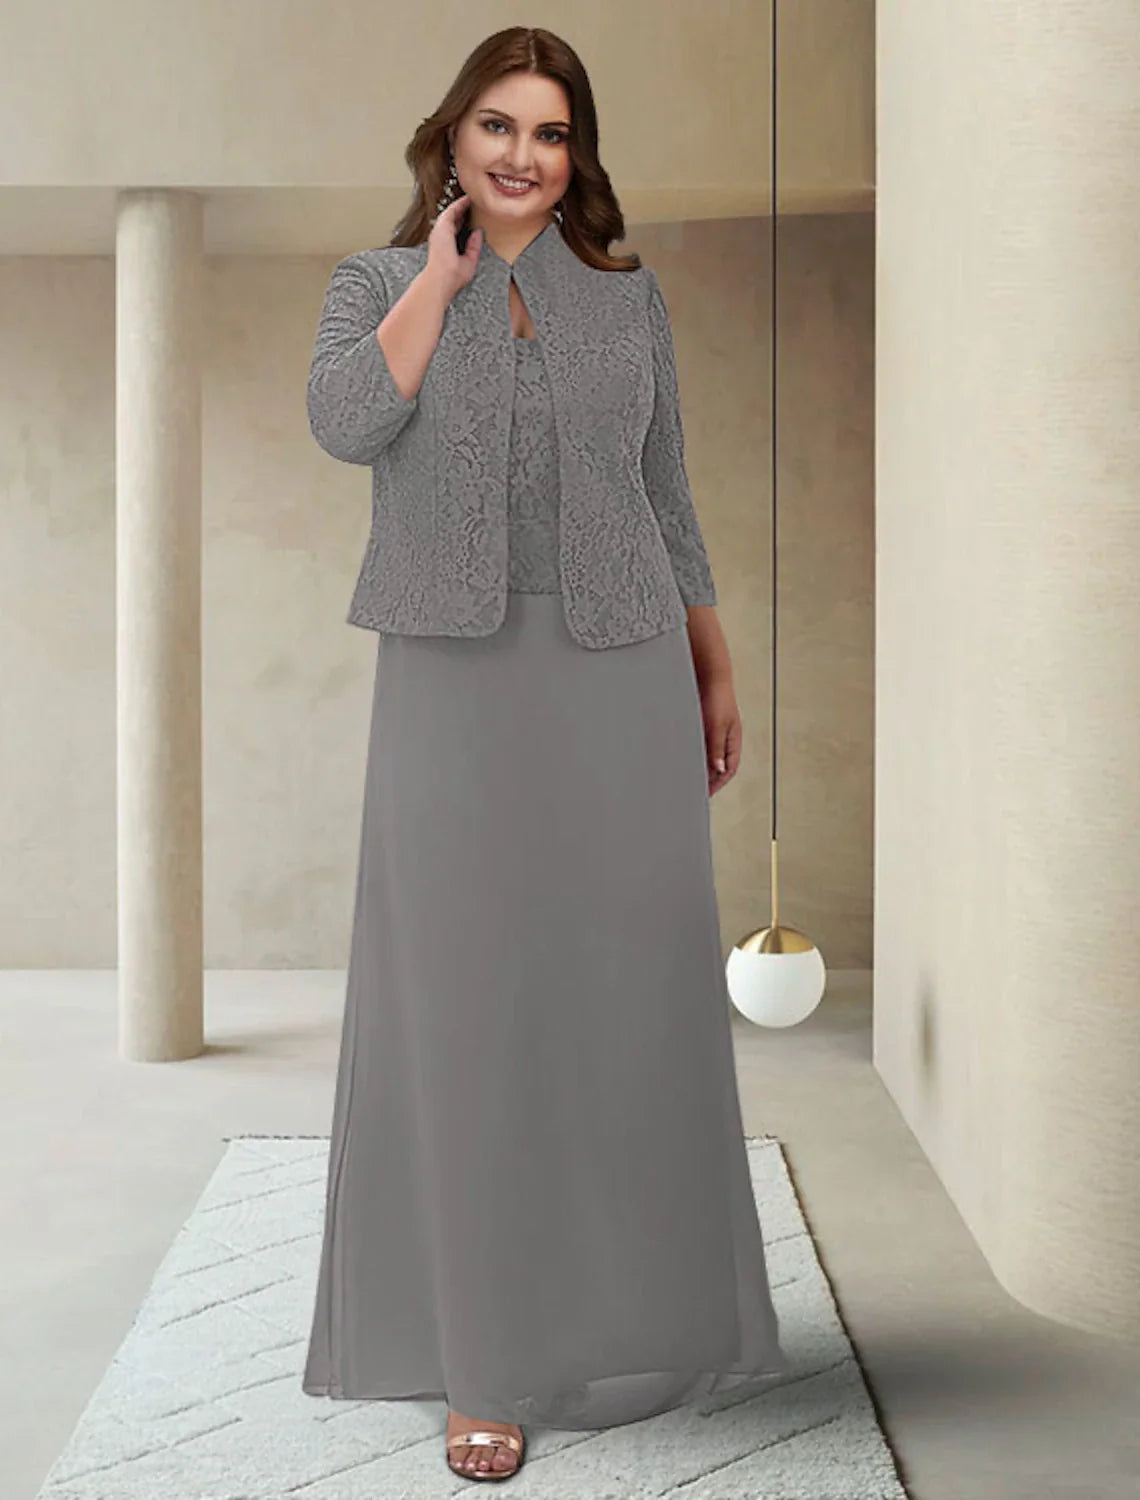 Two Piece Sheath / Column Mother of the Bride Dress Plus Size Elegant Jewel Neck Ankle Length Chiffon Lace 3/4 Length Sleeve Wrap Included with Appliques